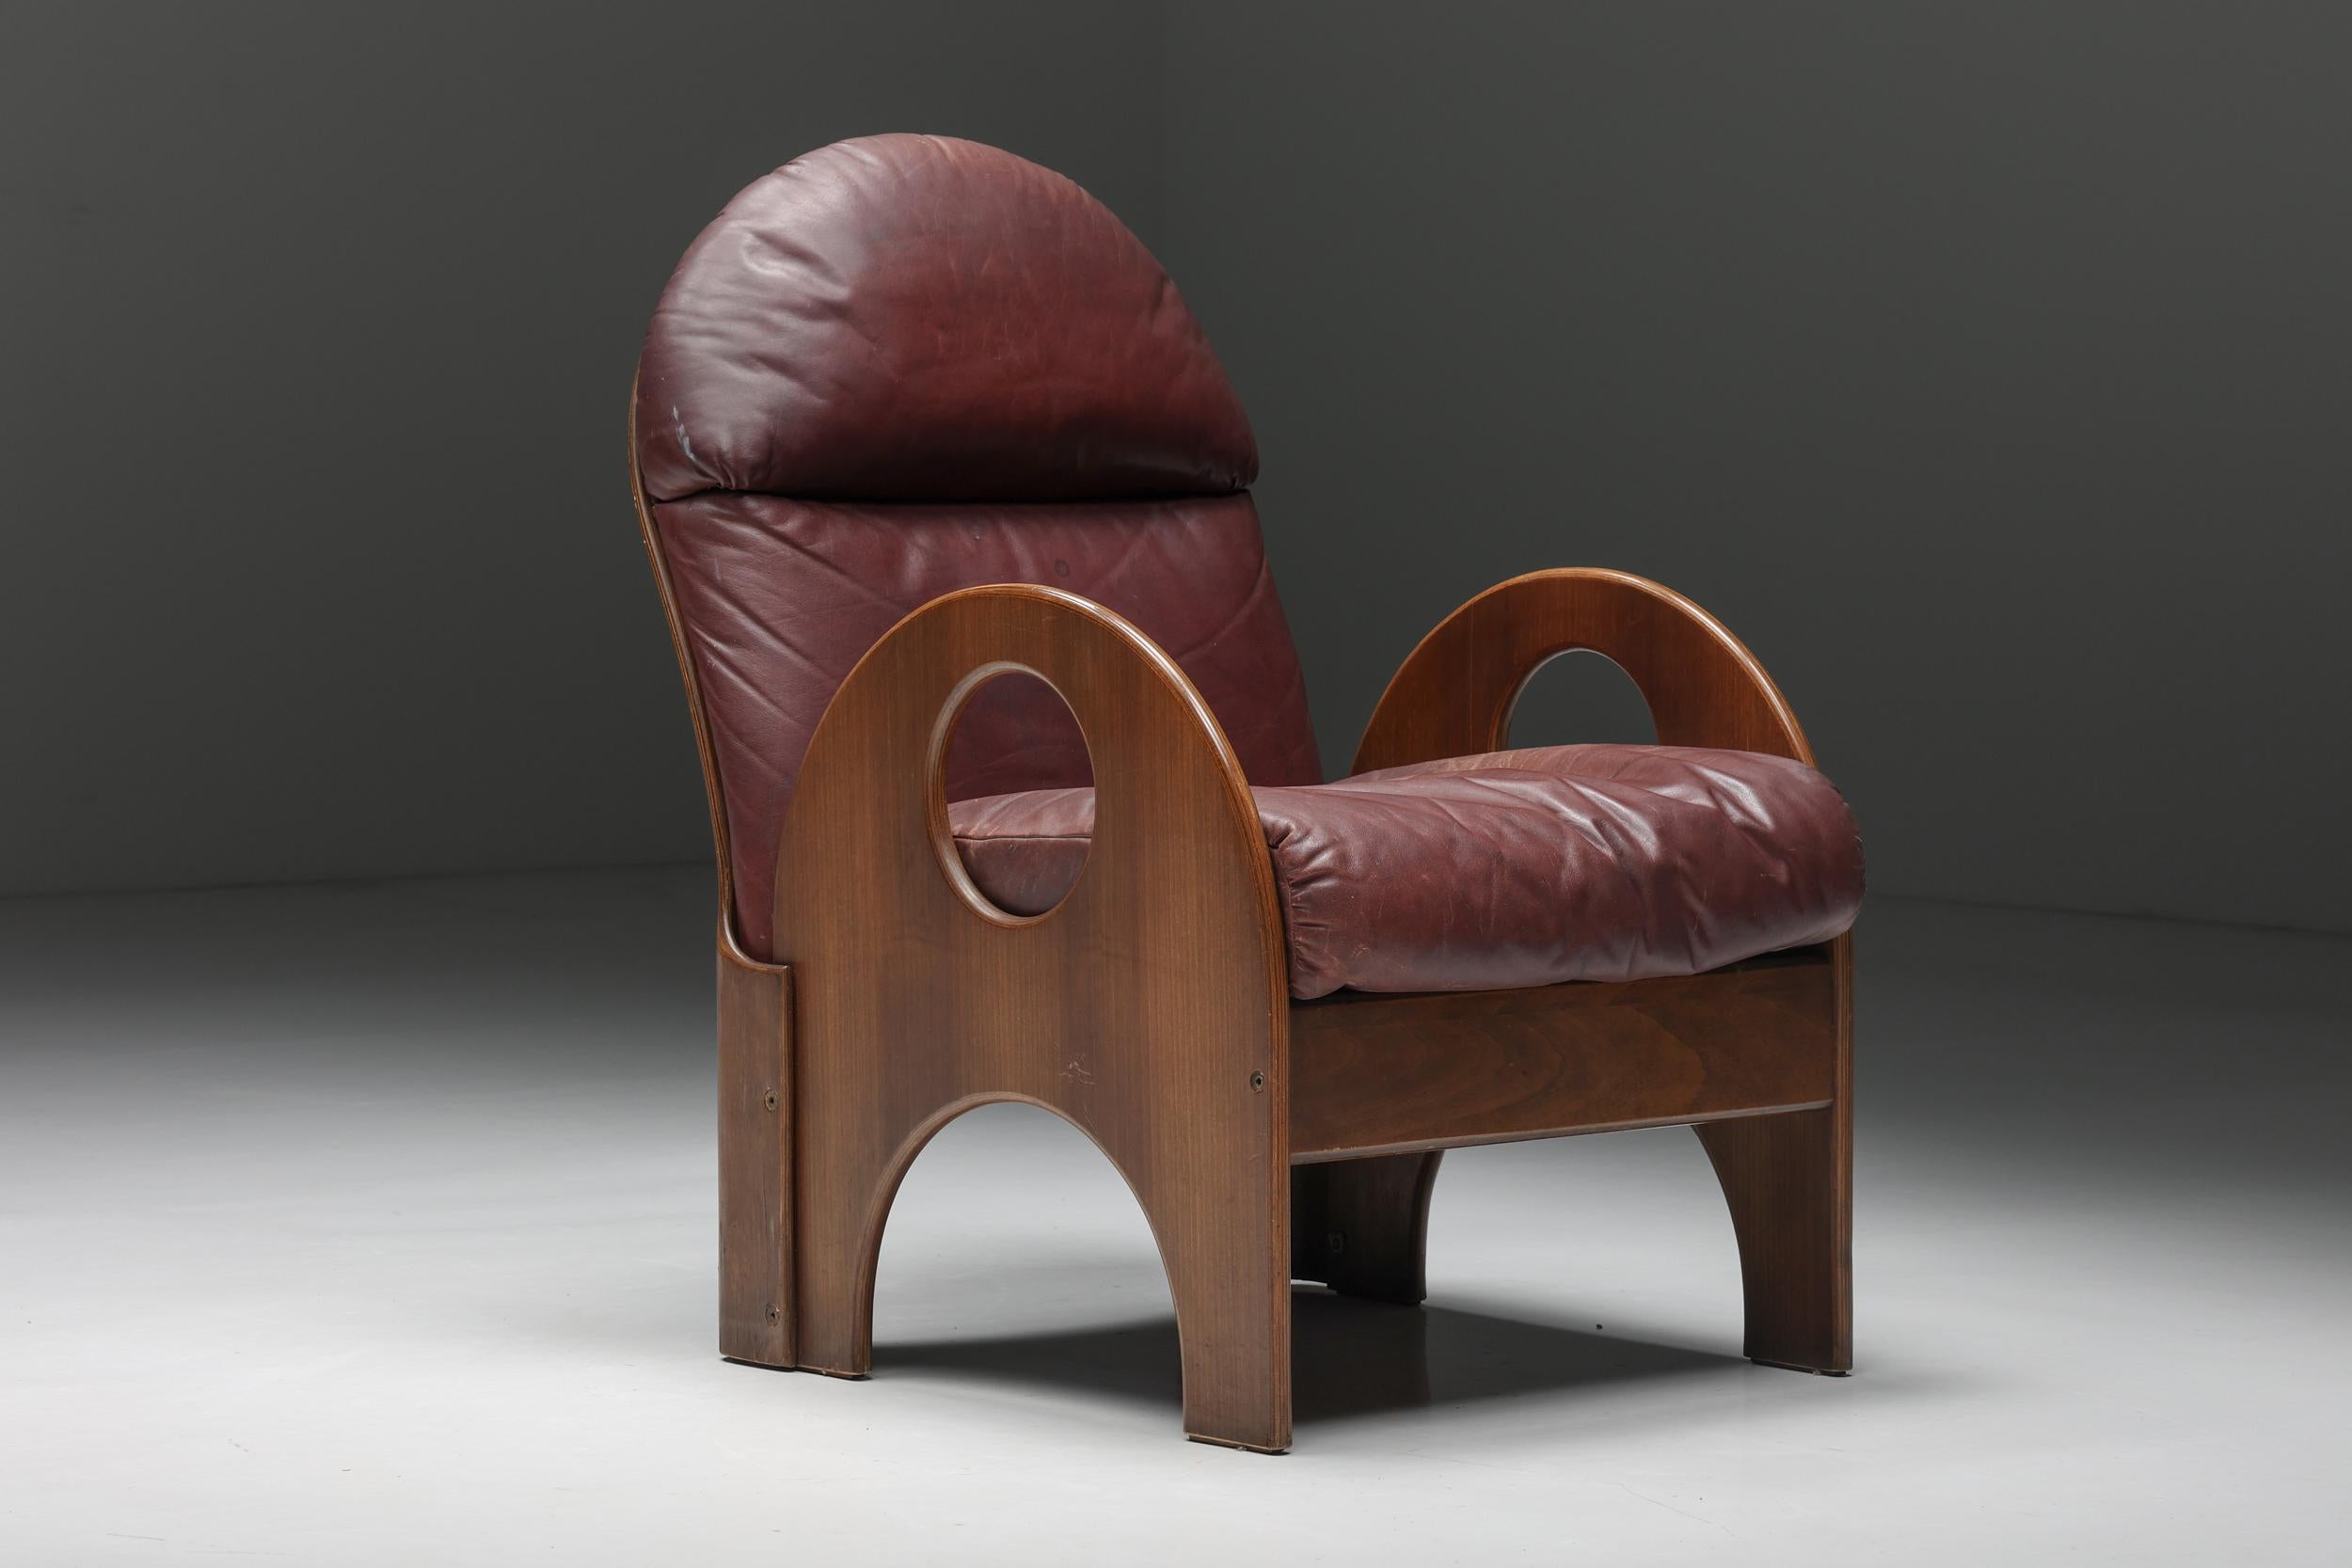 Italian Pair of 'Arcata' Easy Chairs by Gae Aulenti, Walnut and Burgundy Leather, 1968 For Sale